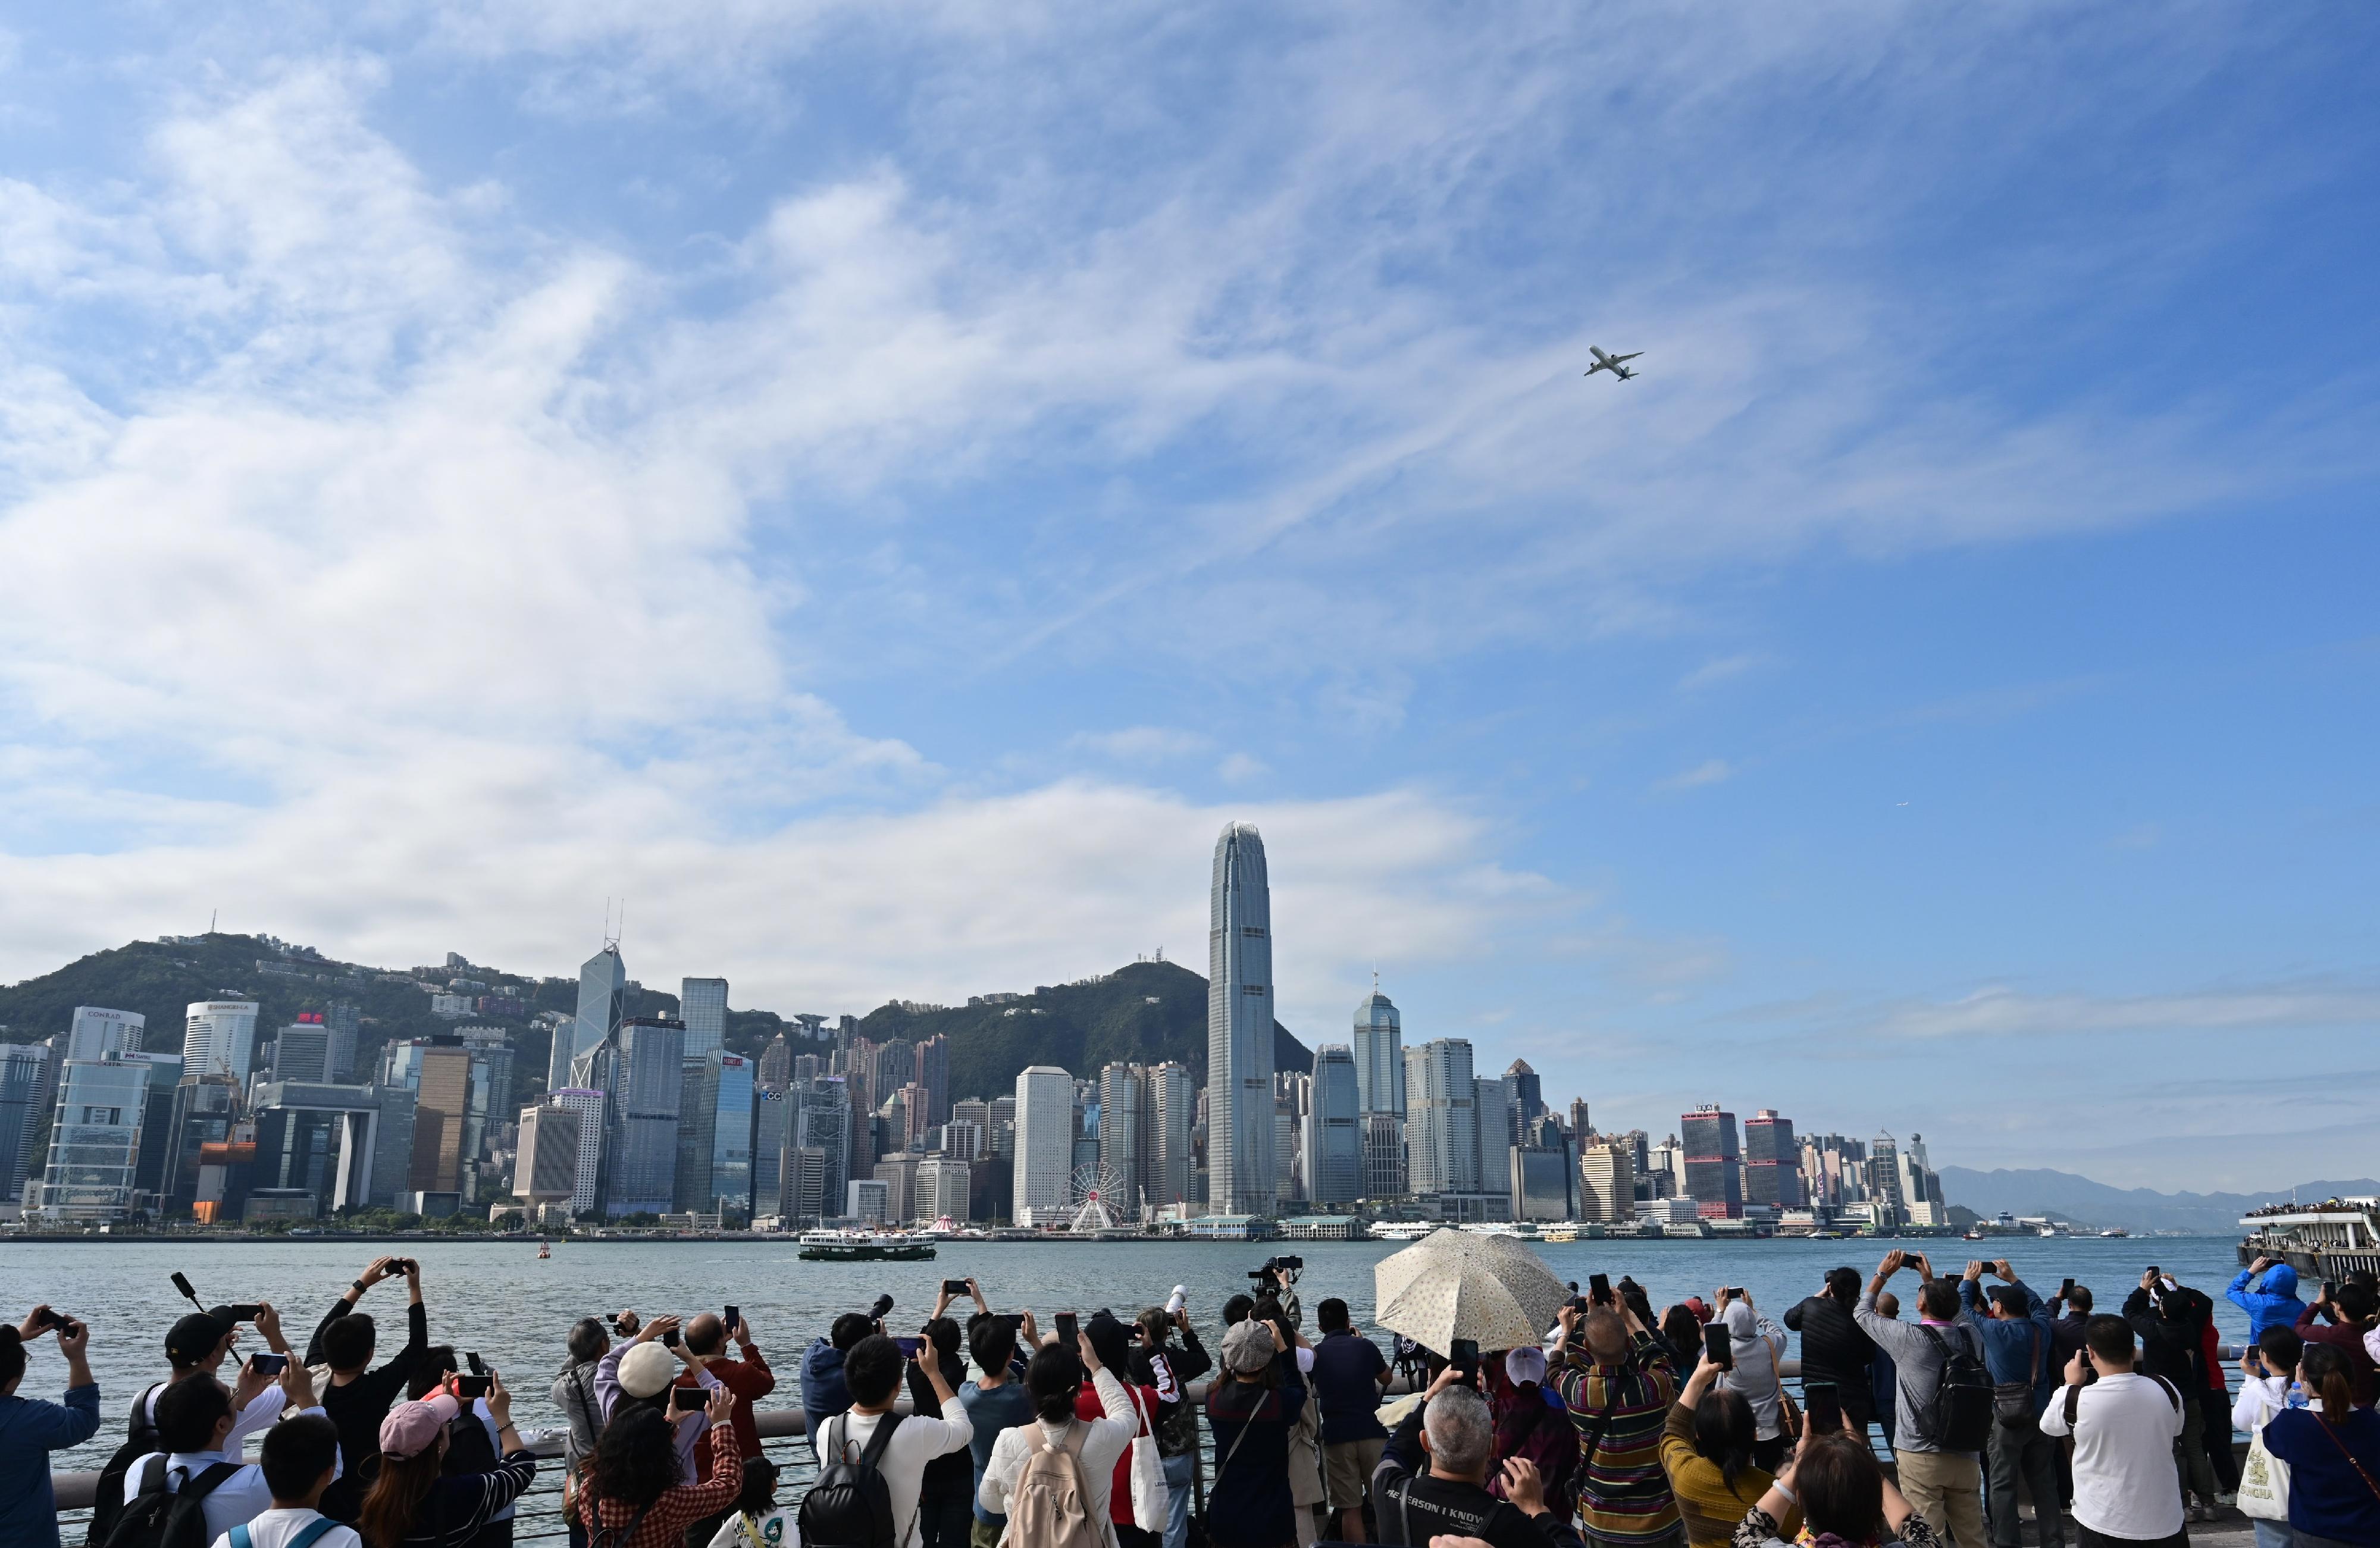 The flight demonstration of home-grown aircraft C919 concluded successfully this morning (December 16). Photo shows members of the public and tourists witnessing the historic moment of the domestic C919 aircraft making its debut appearance over Victoria Harbour.